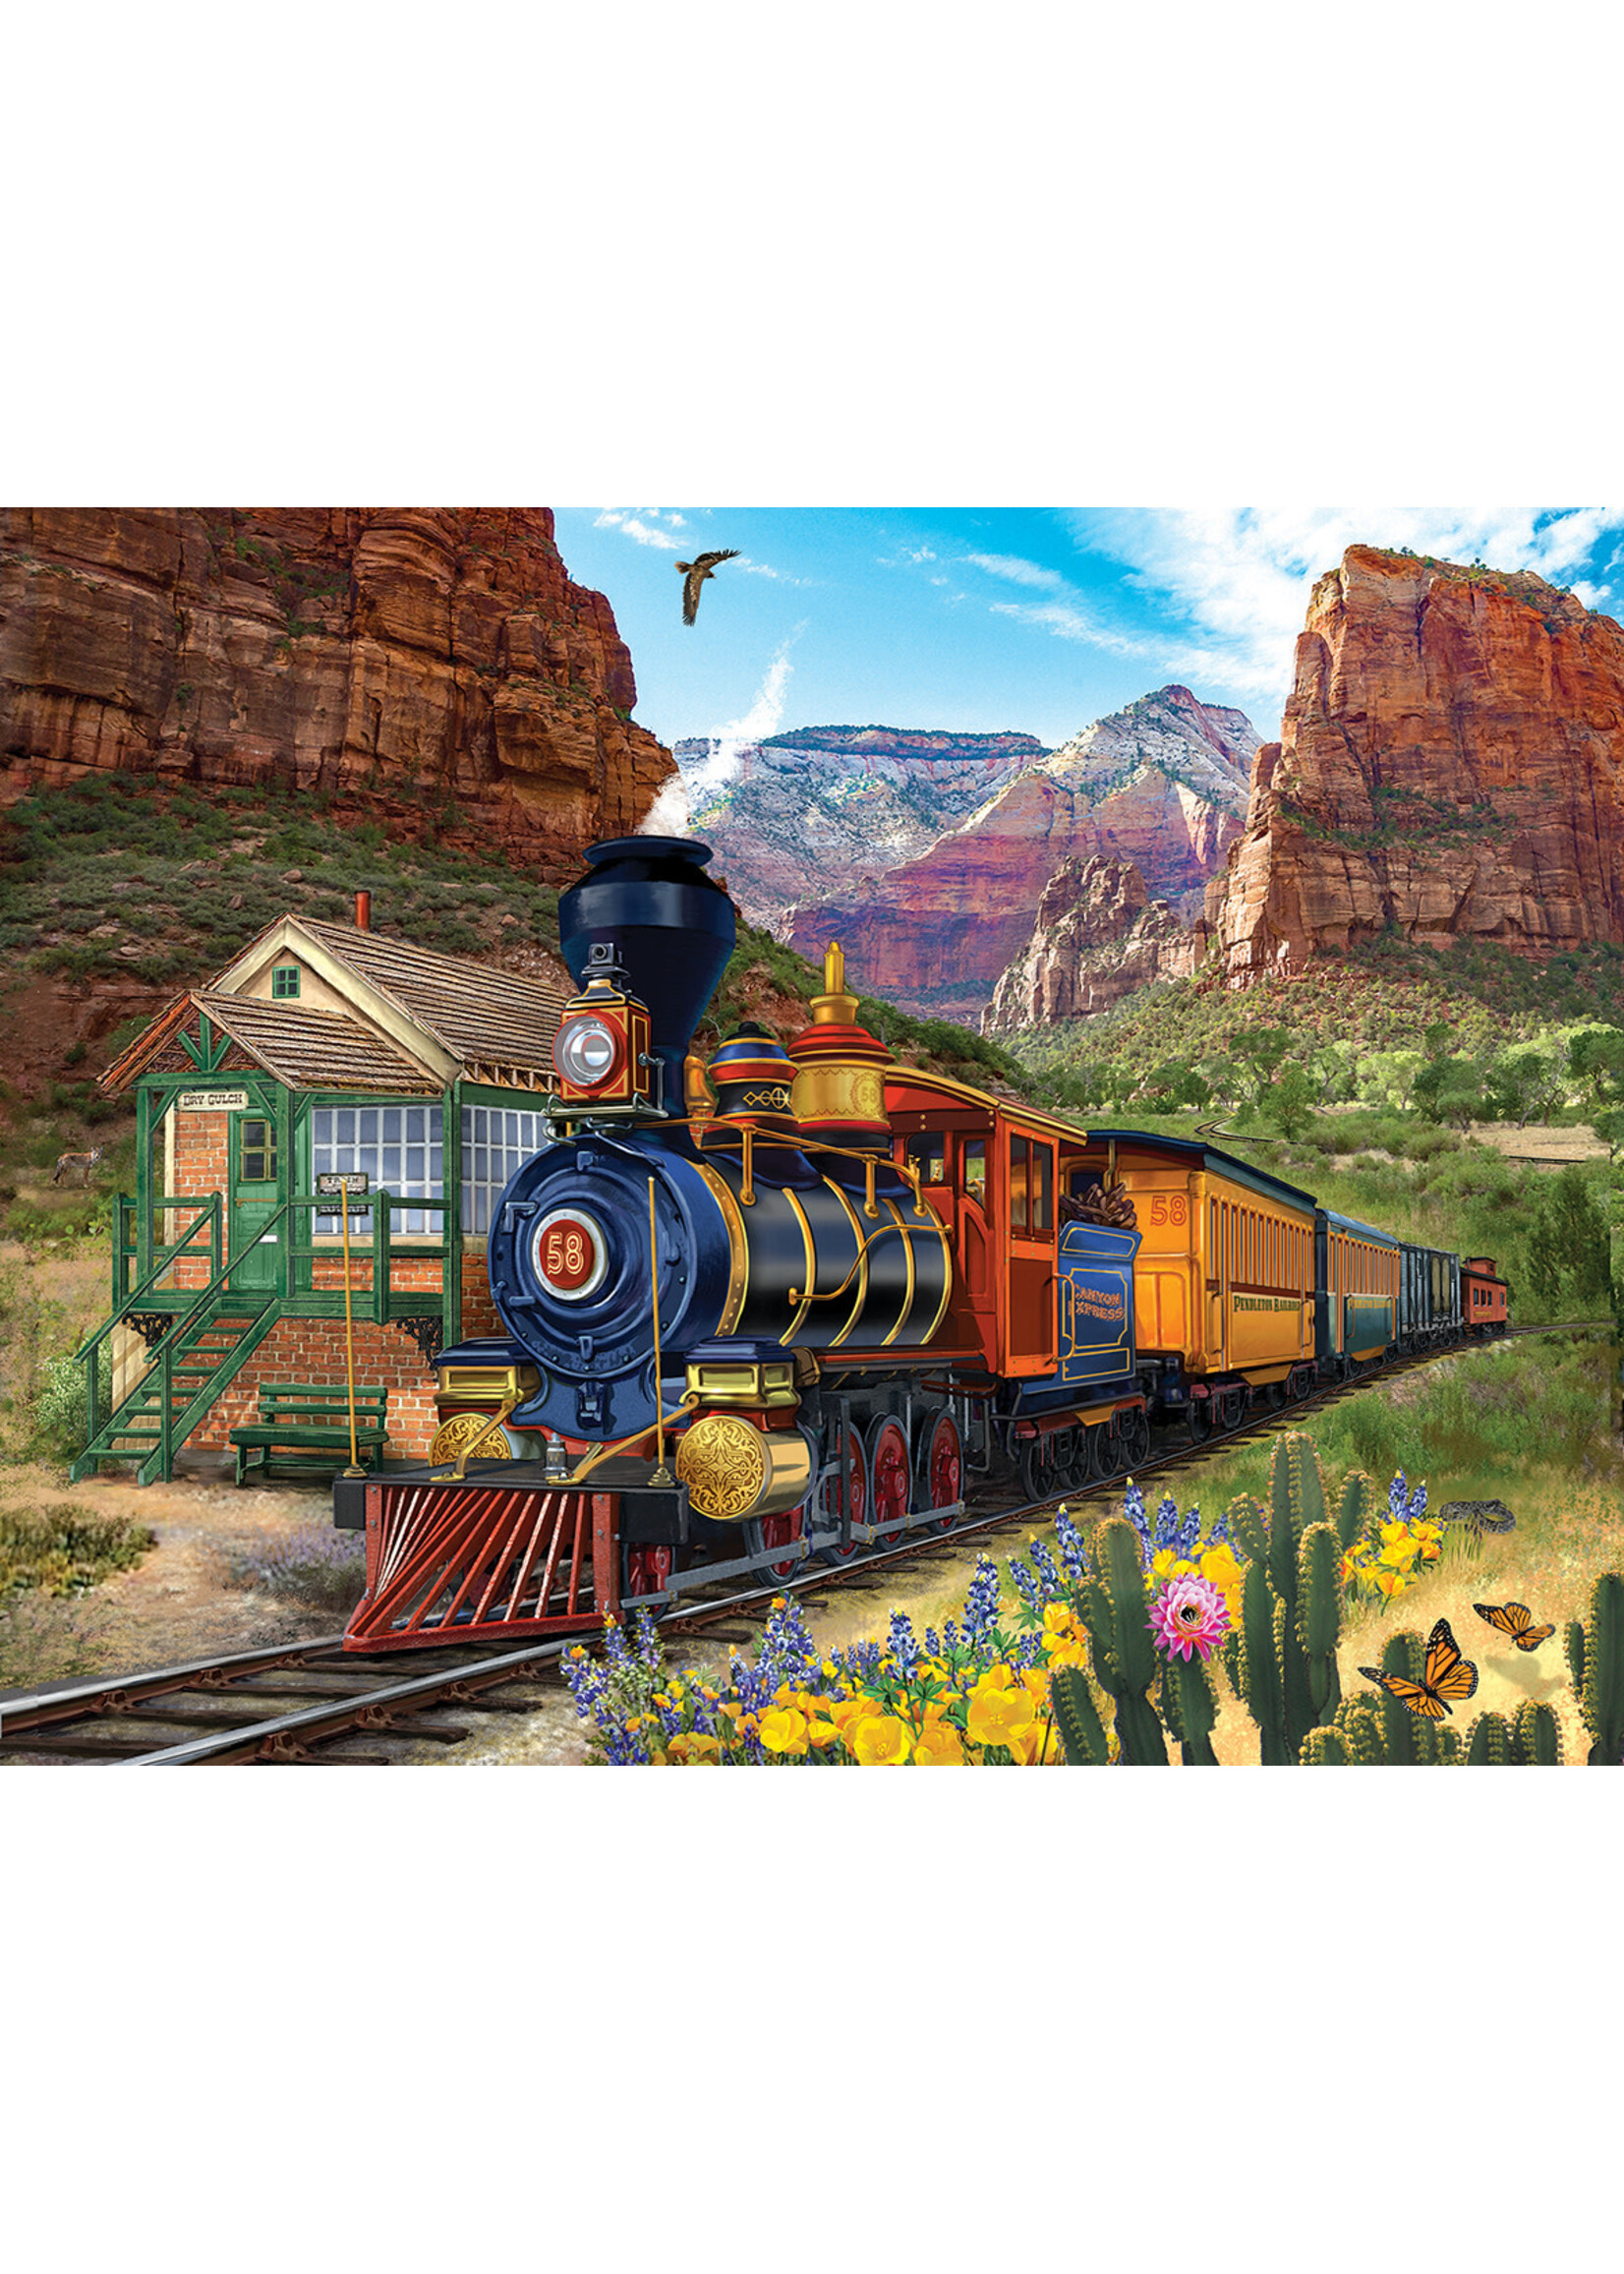 Sunsout Dry Gulch Puzzle 1000+ Large Pieces